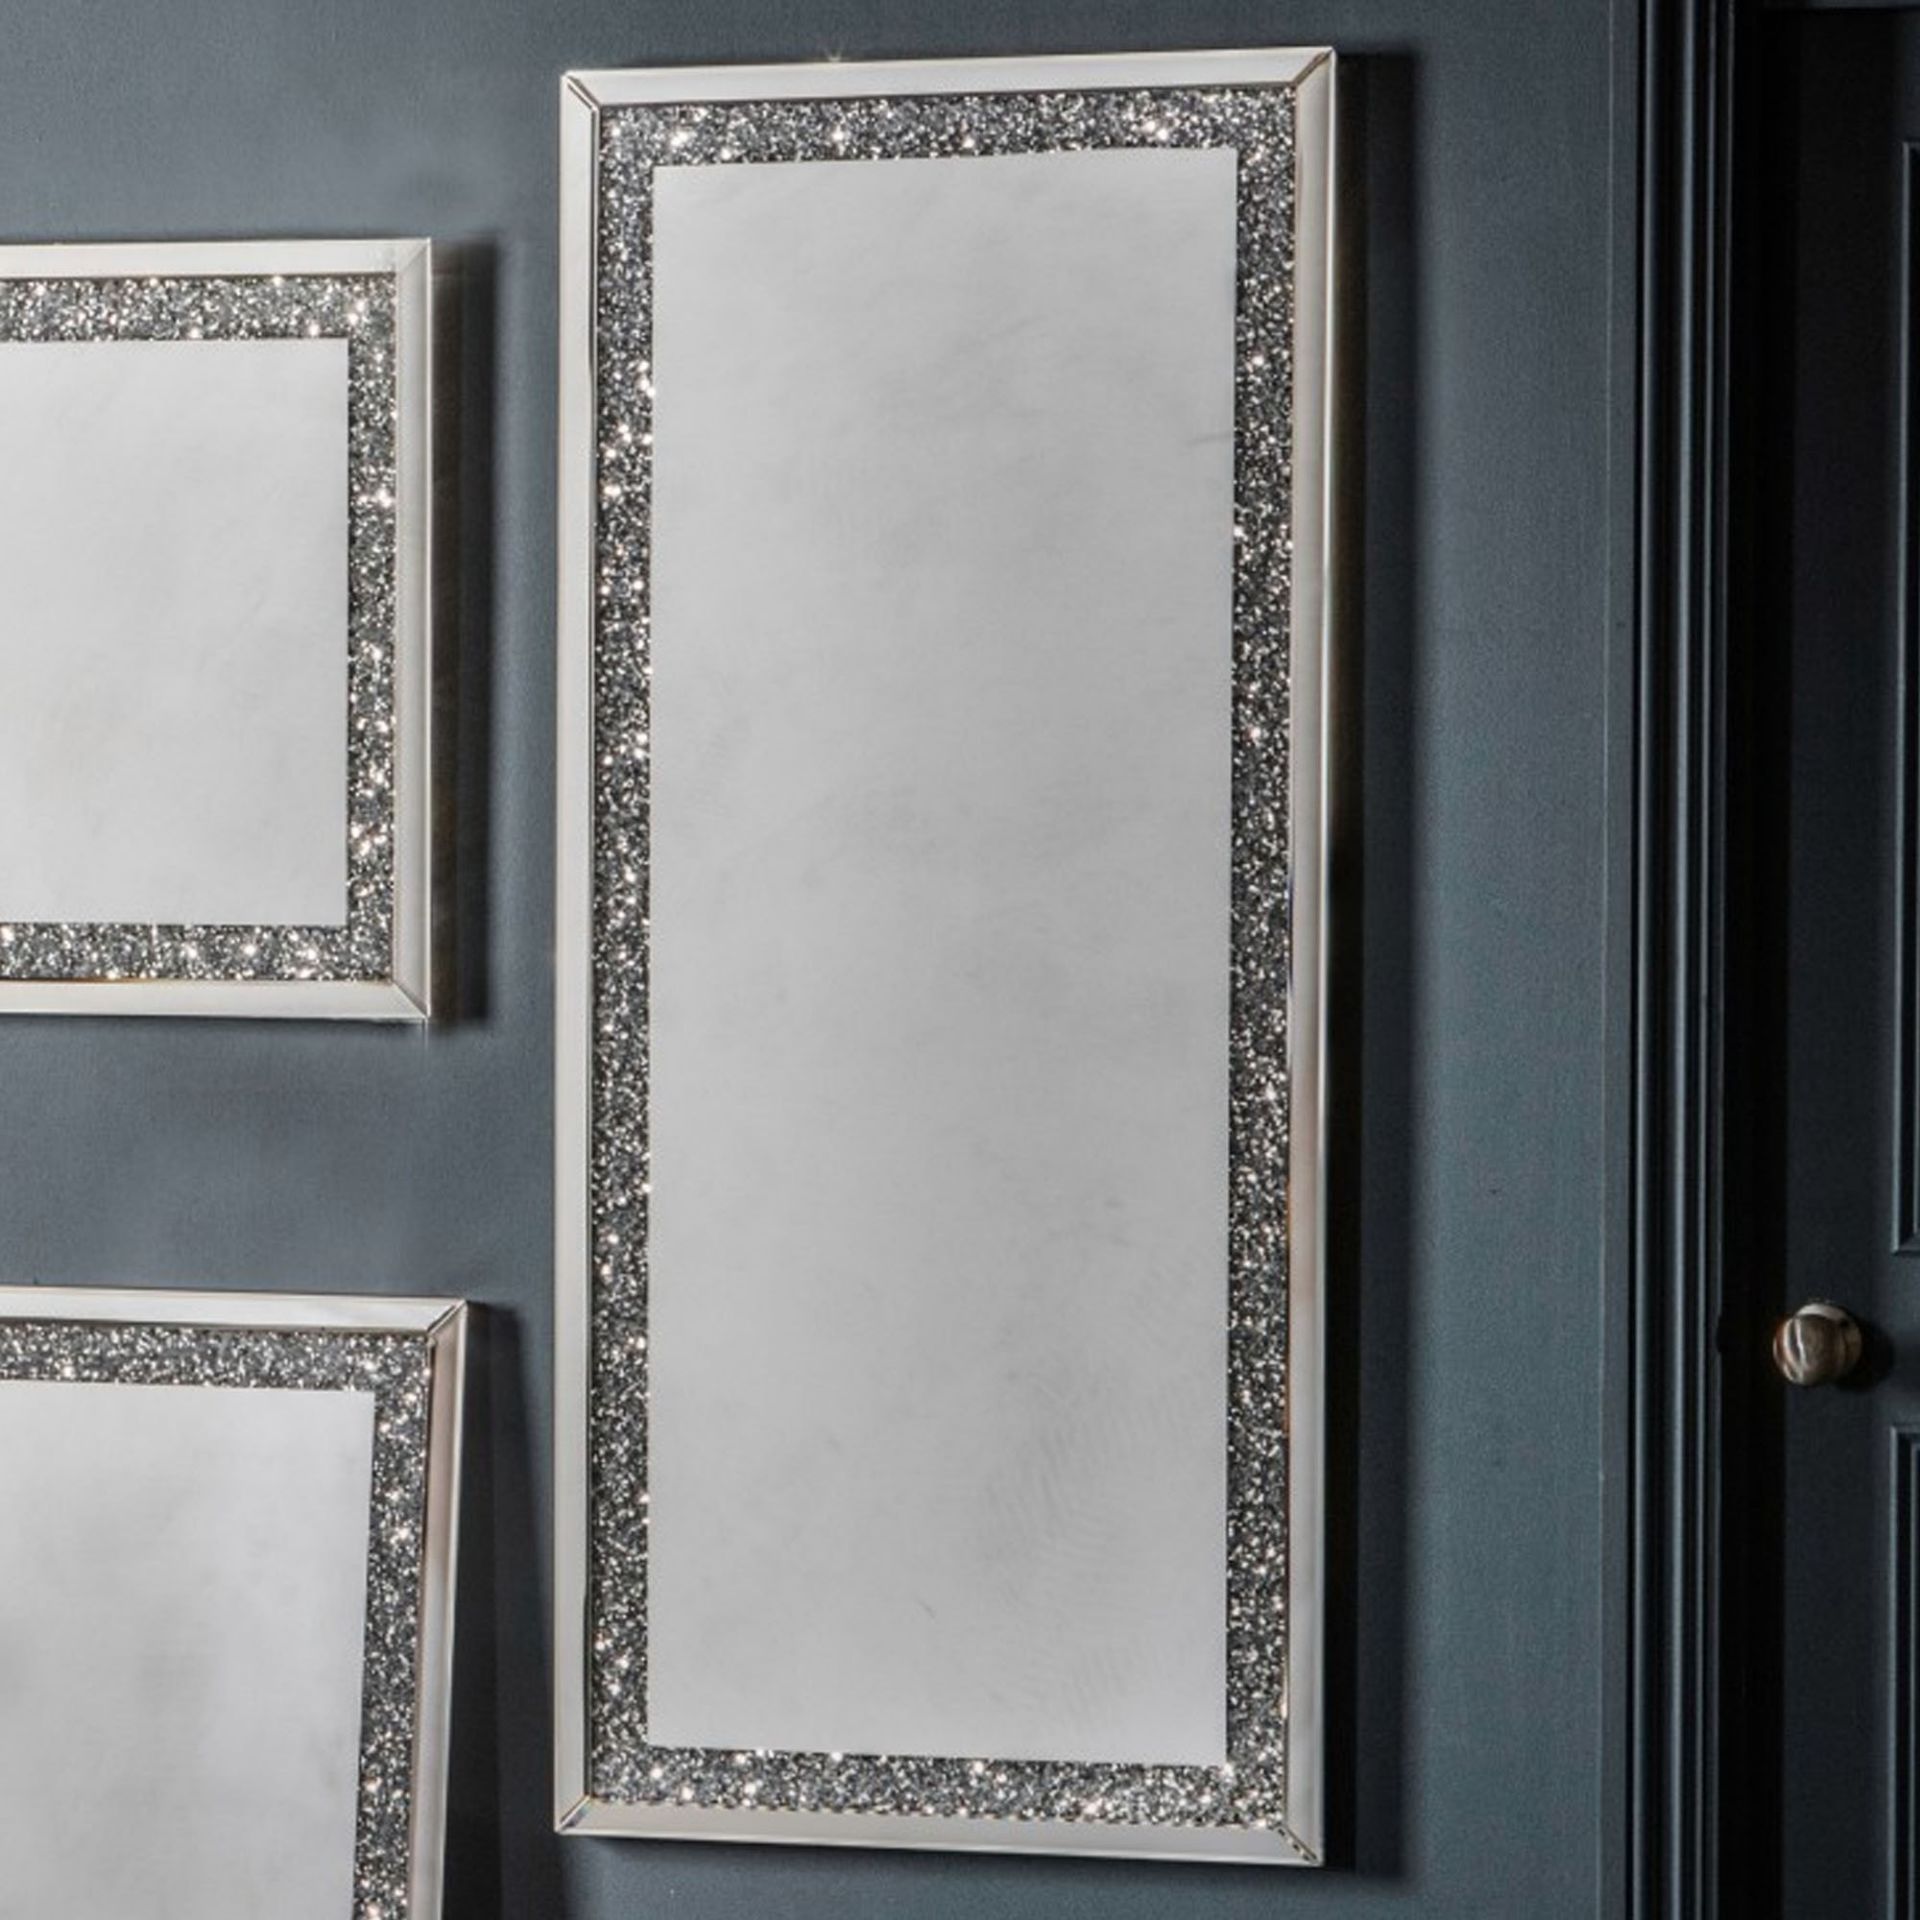 Westmoore Silver Mirror exquisitely detailed and has a beautiful silver finish. This stunning mirror